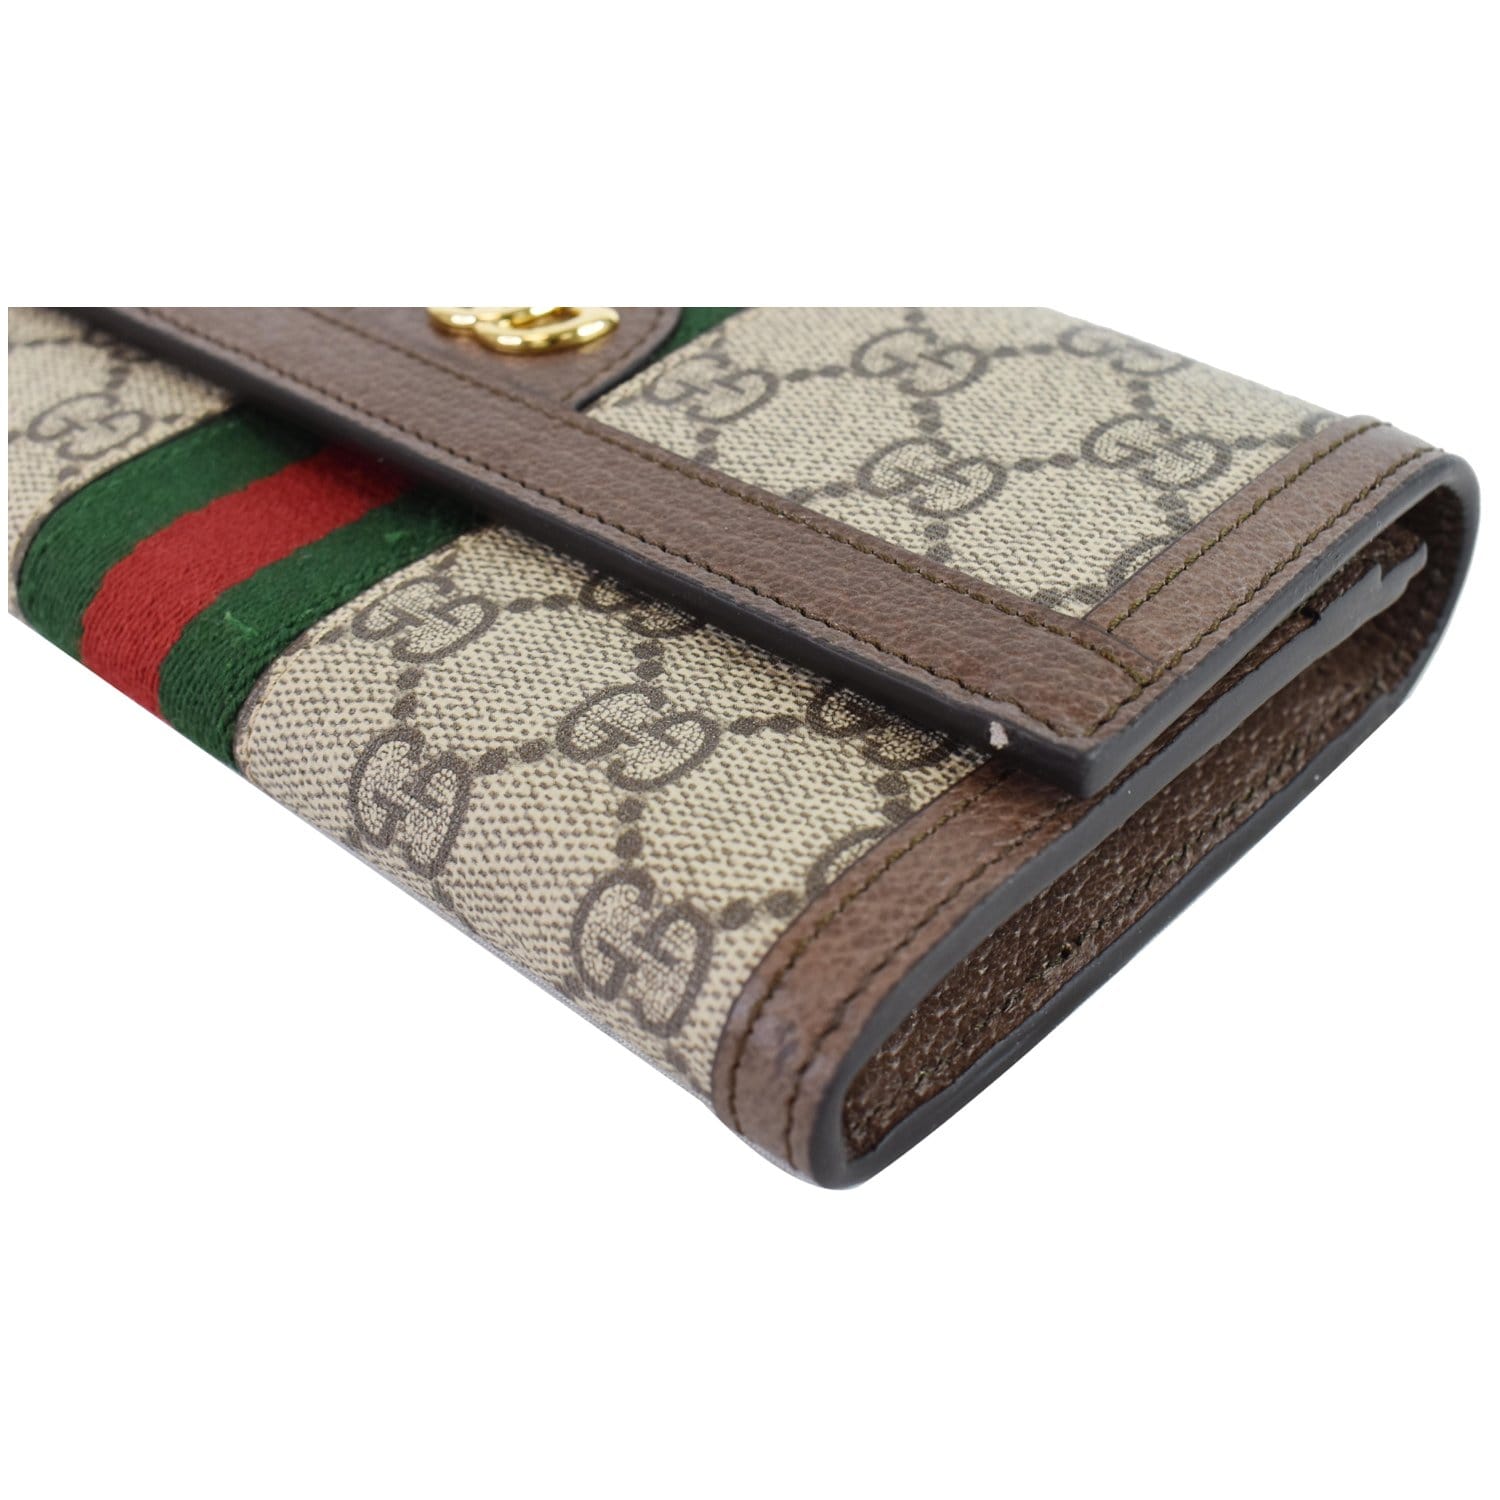 GG Marmont continental wallet in beige/ebony GG Supreme